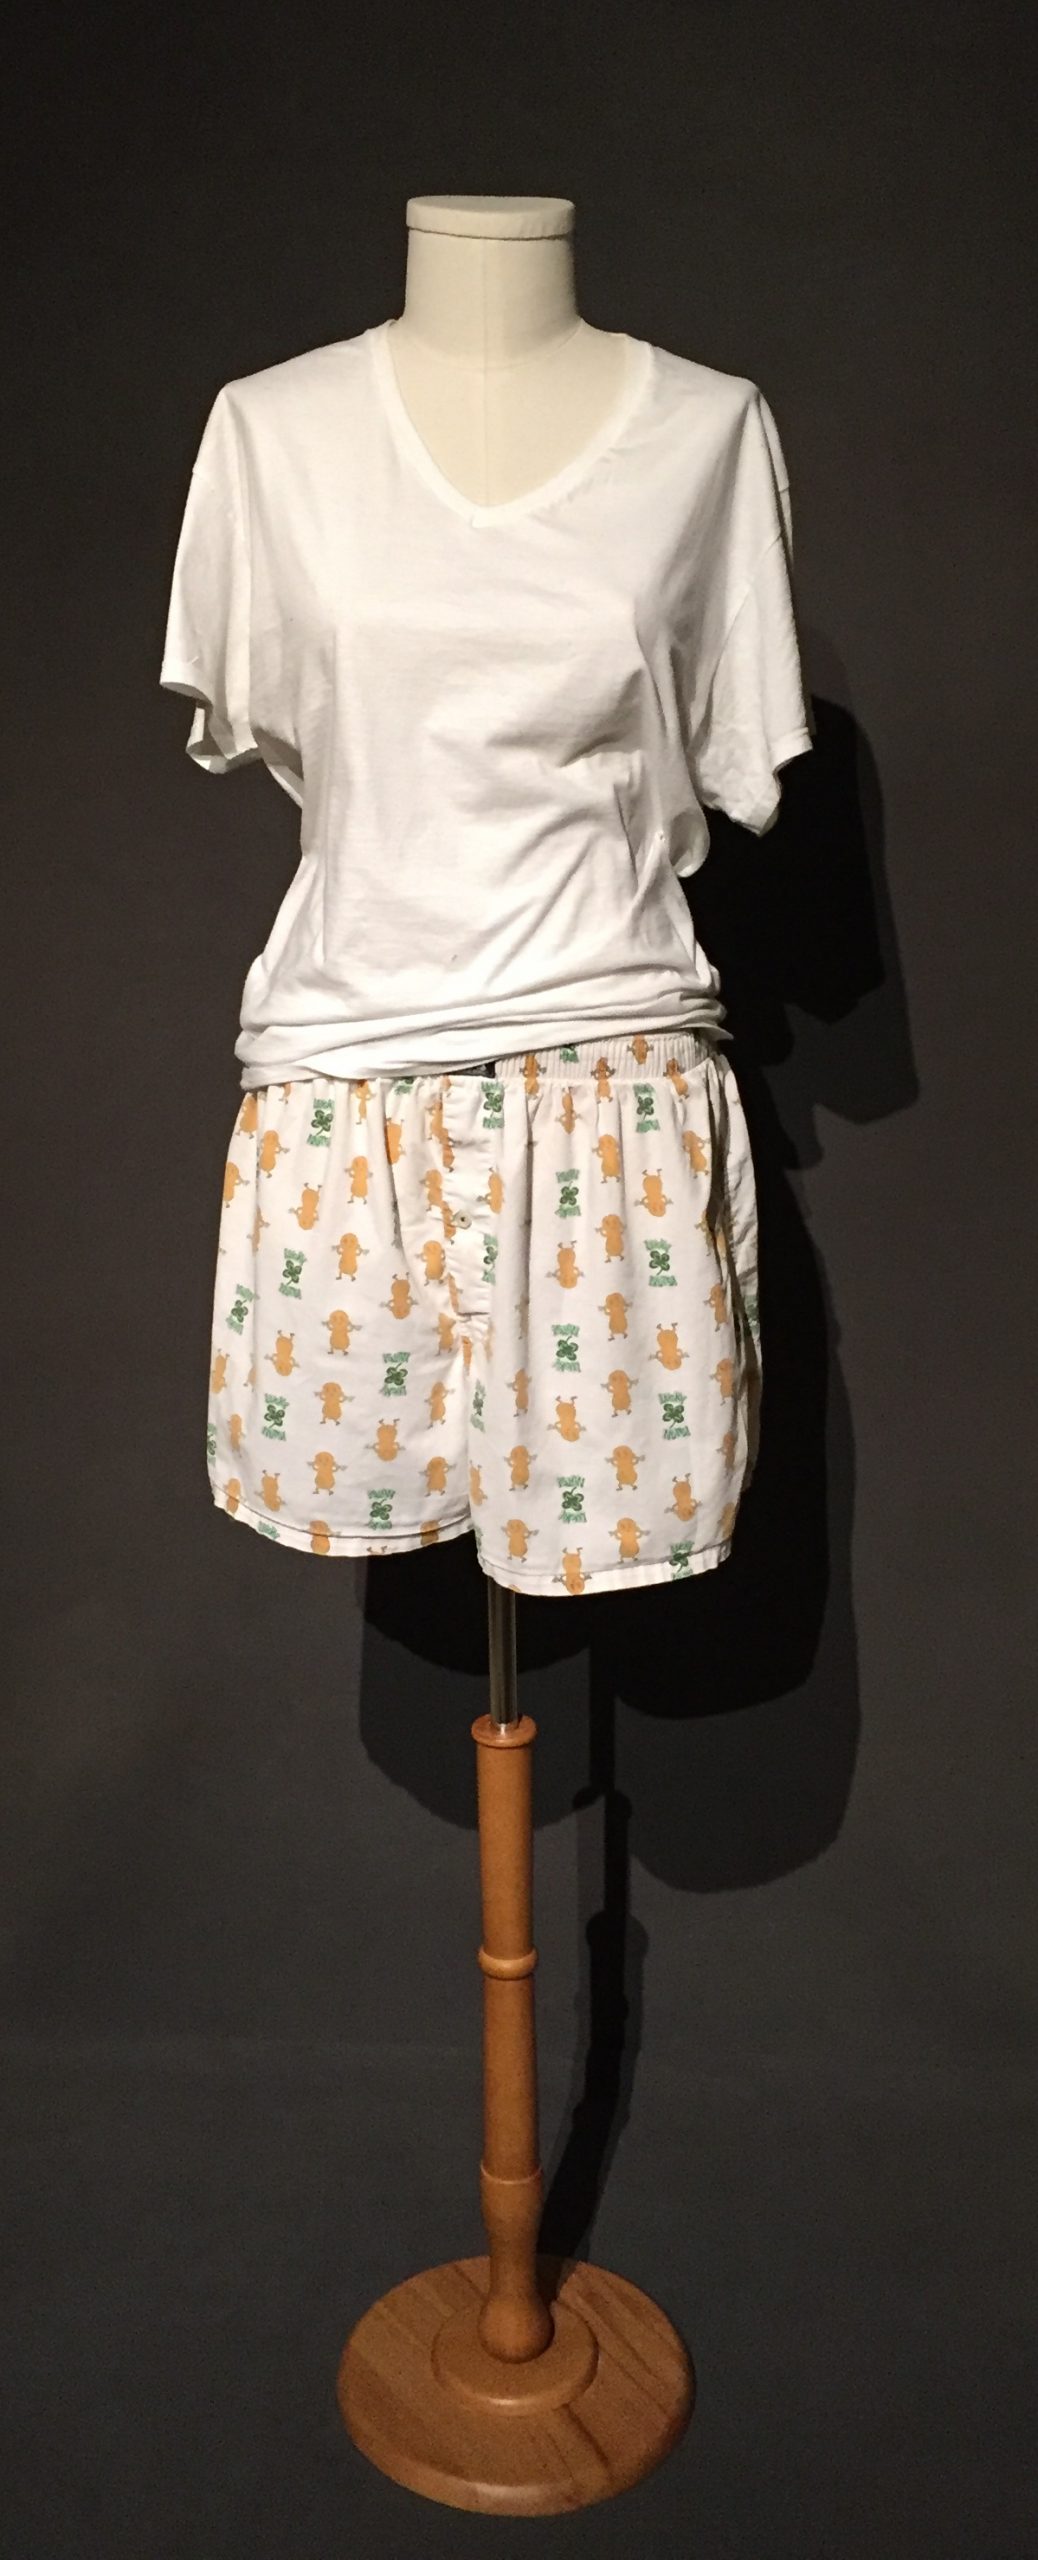 White boxer shorts with print featuring peanuts and four-leaf clovers with text reading: "Lucky Nuts" paired with white t-shirt